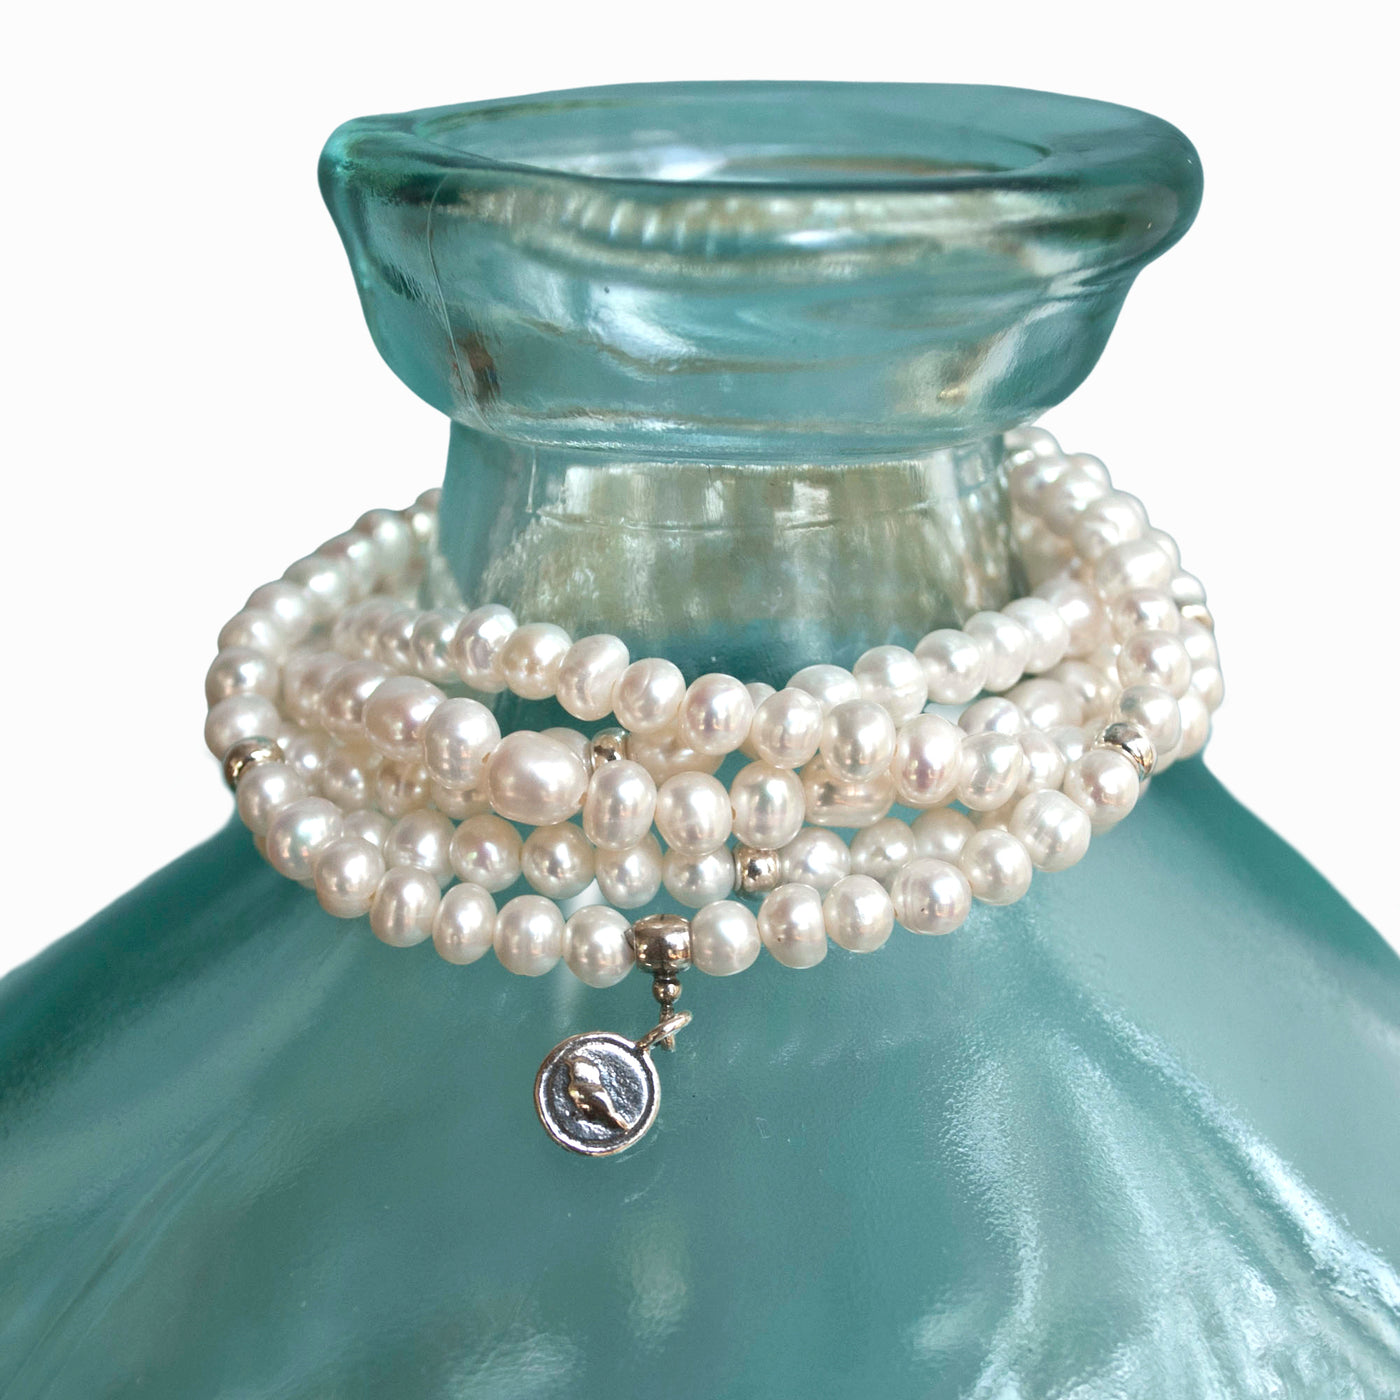 Five bracelets of white freshwater pearls with sterling accent beads are shown on a green glass bottle.  They are handcrafted in a stretch design to fit nearly everyone.